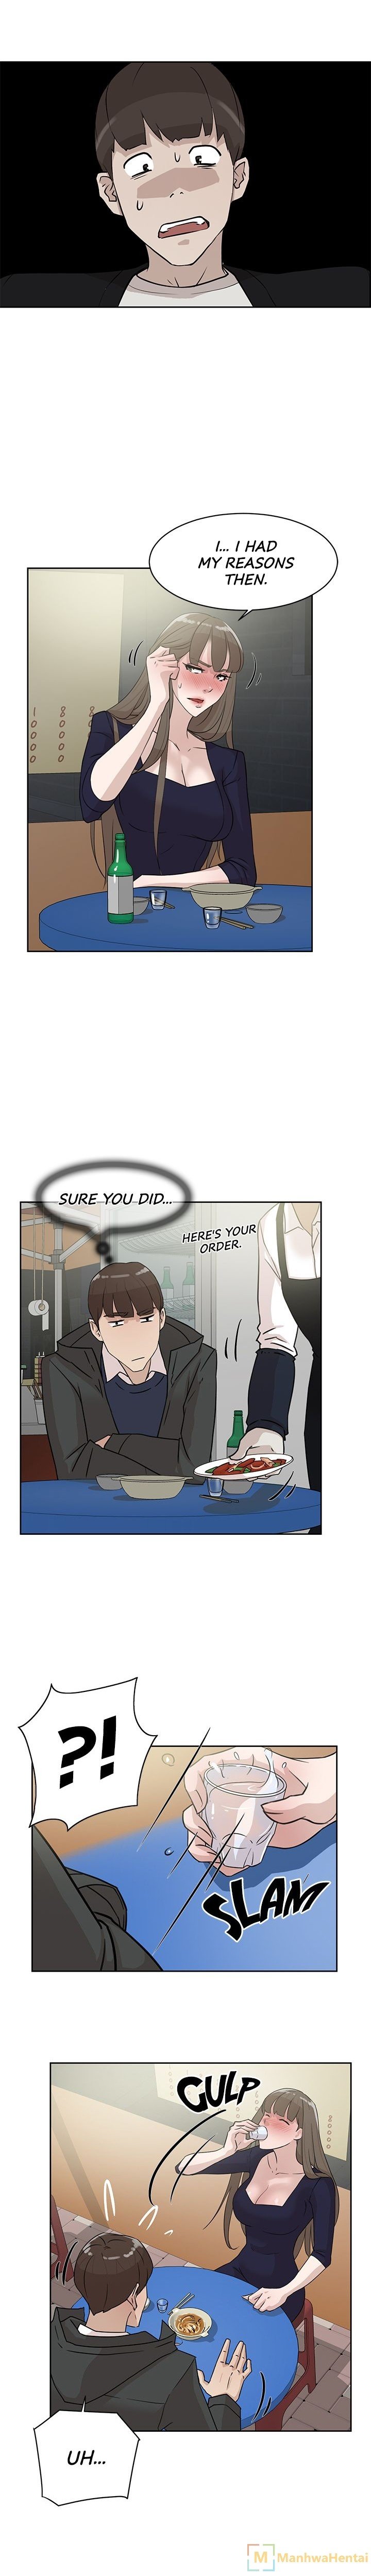 office-affairs-chap-31-2